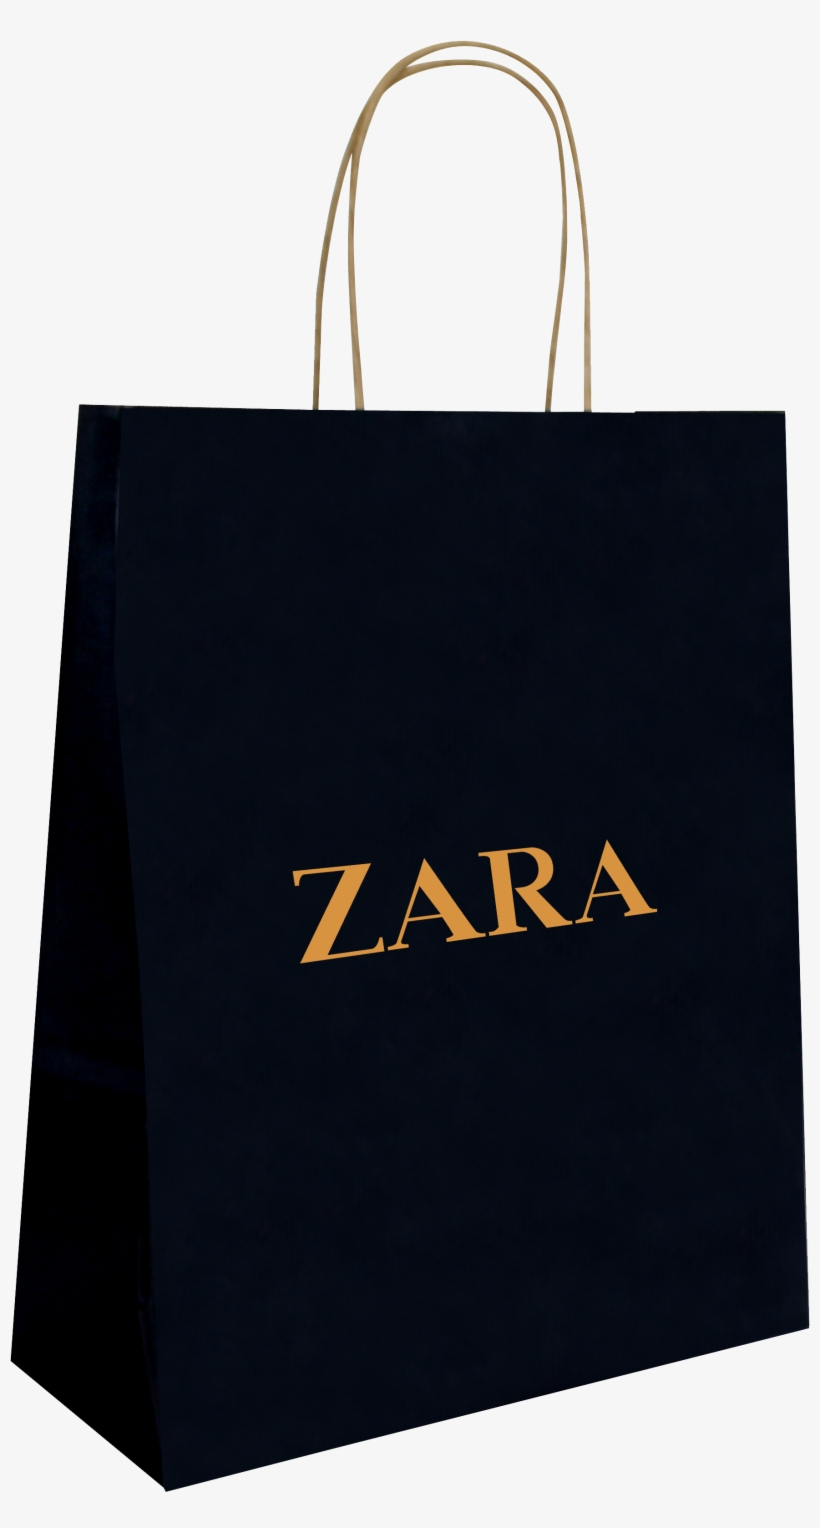 Products - Zara, transparent png #3325716